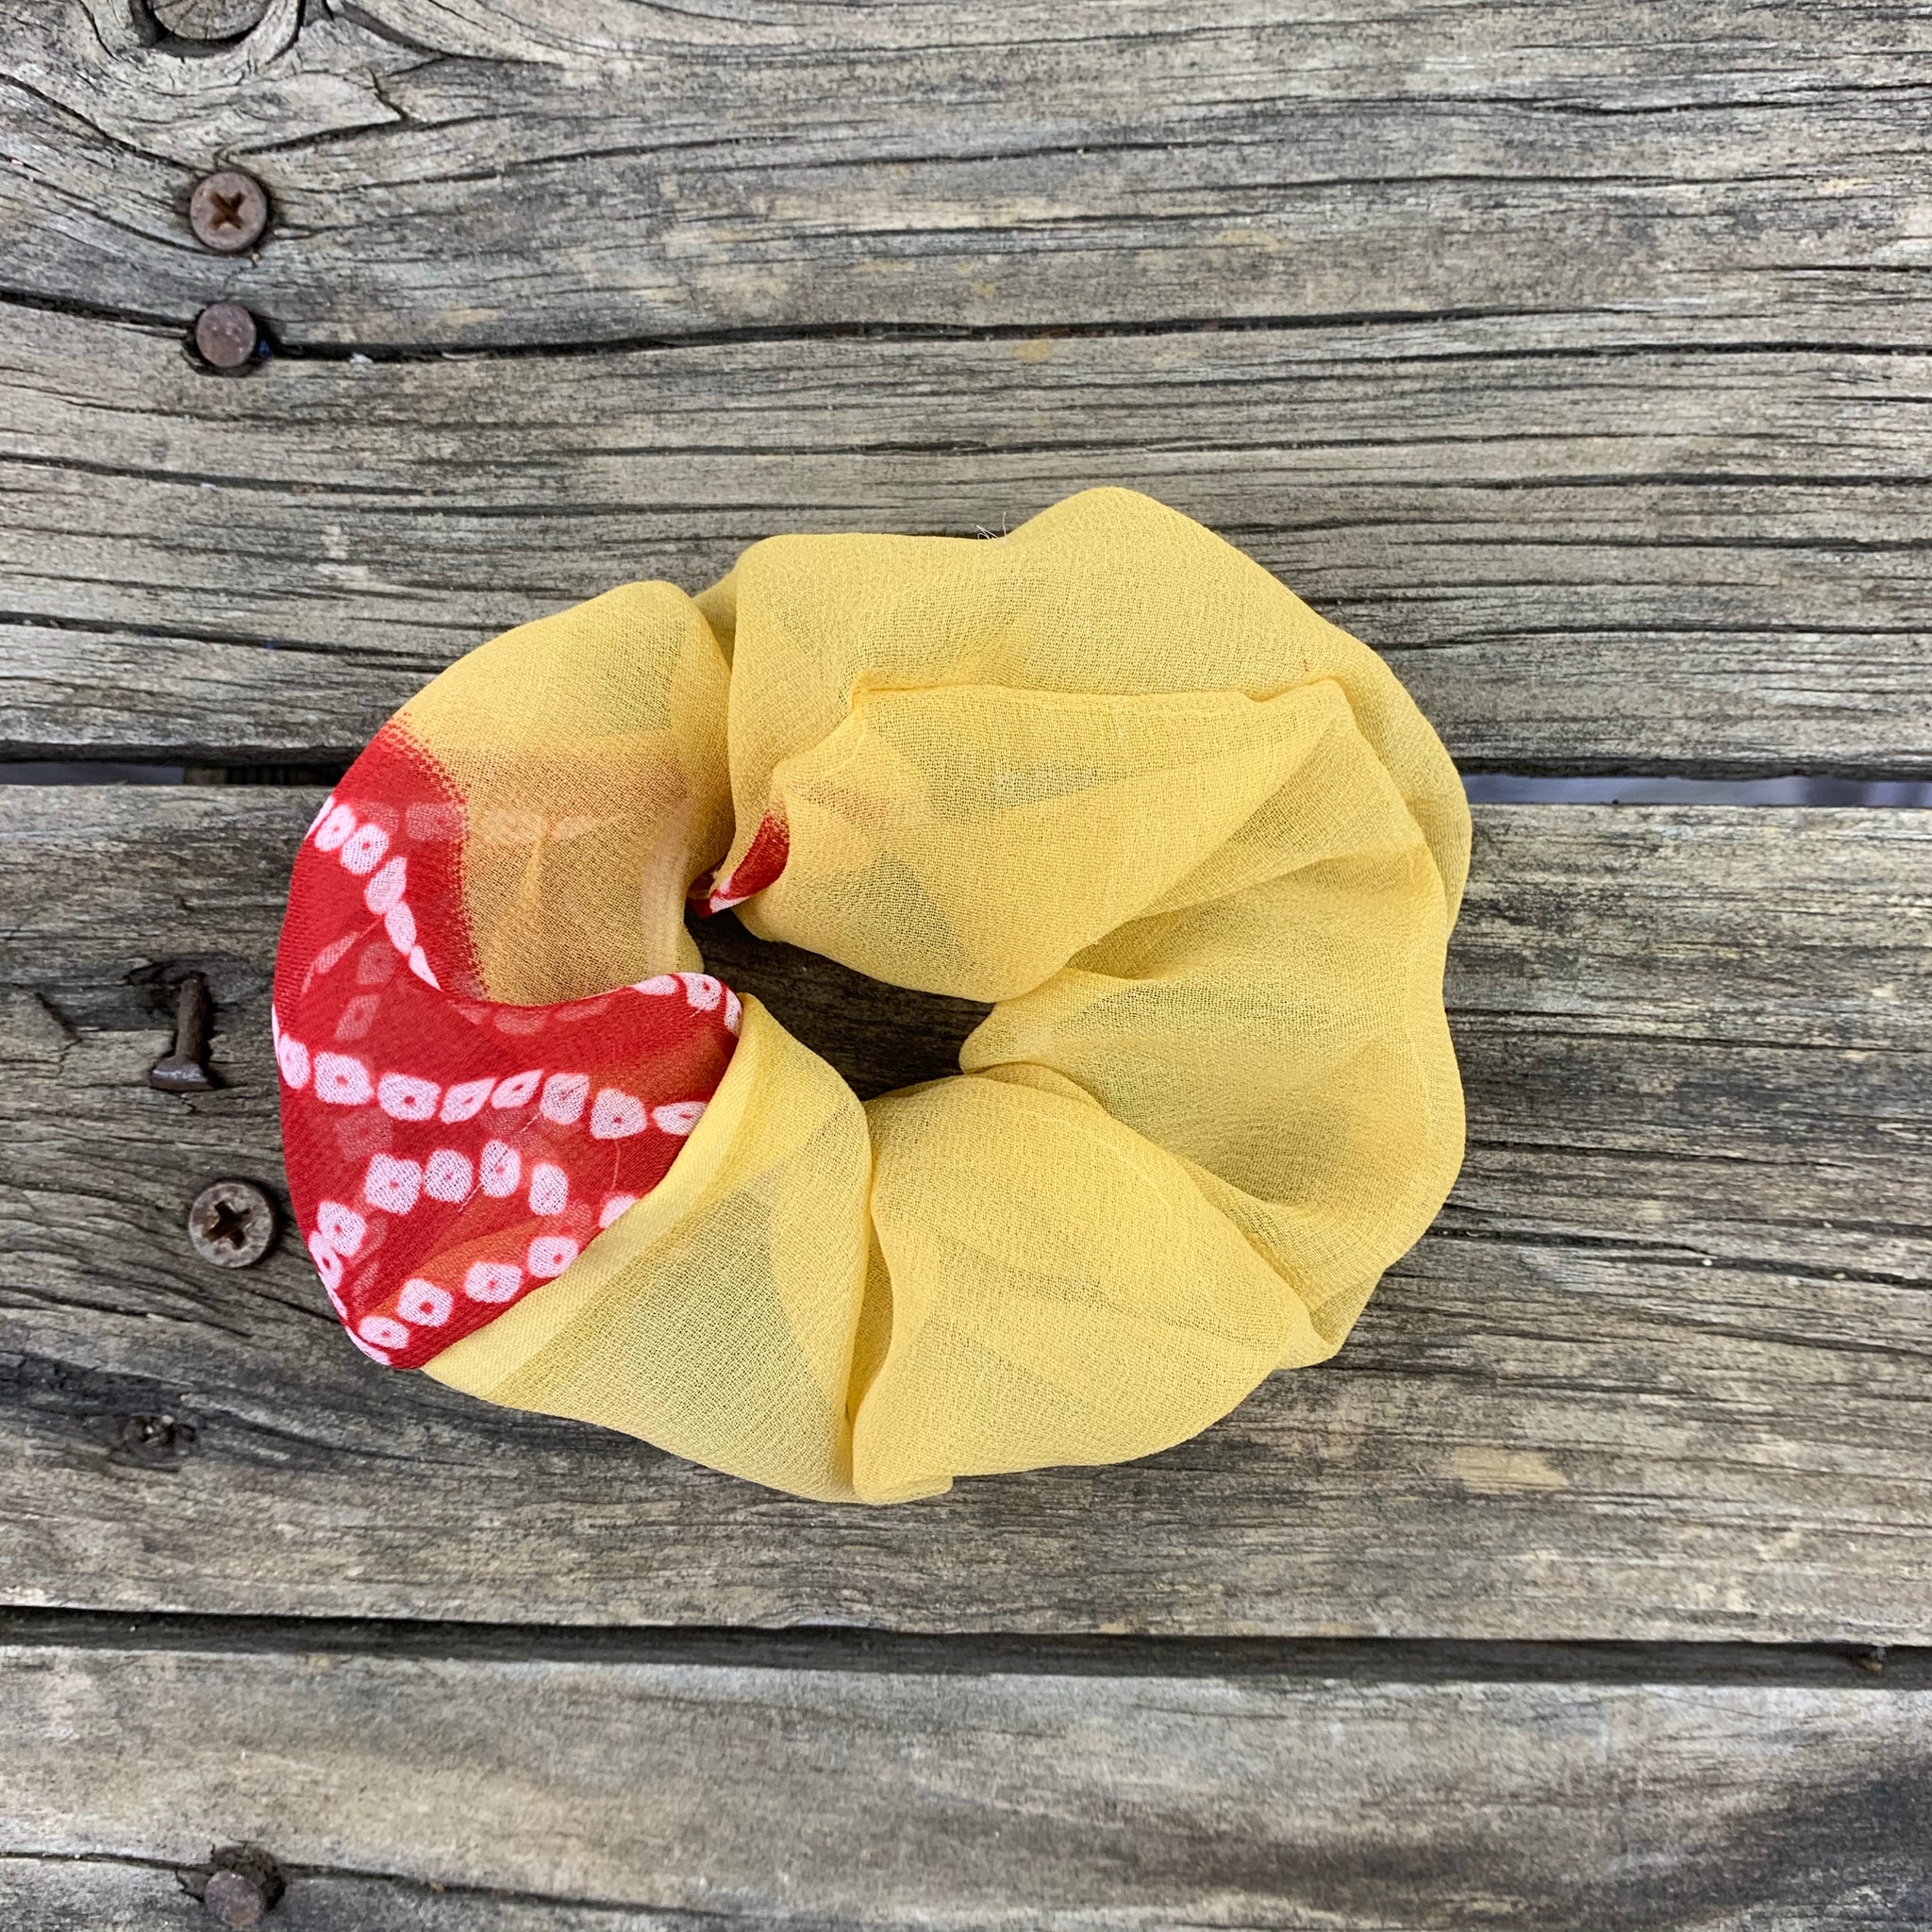 Fair Trade Ethical Upcycled Fabric Scrunchies Sheer